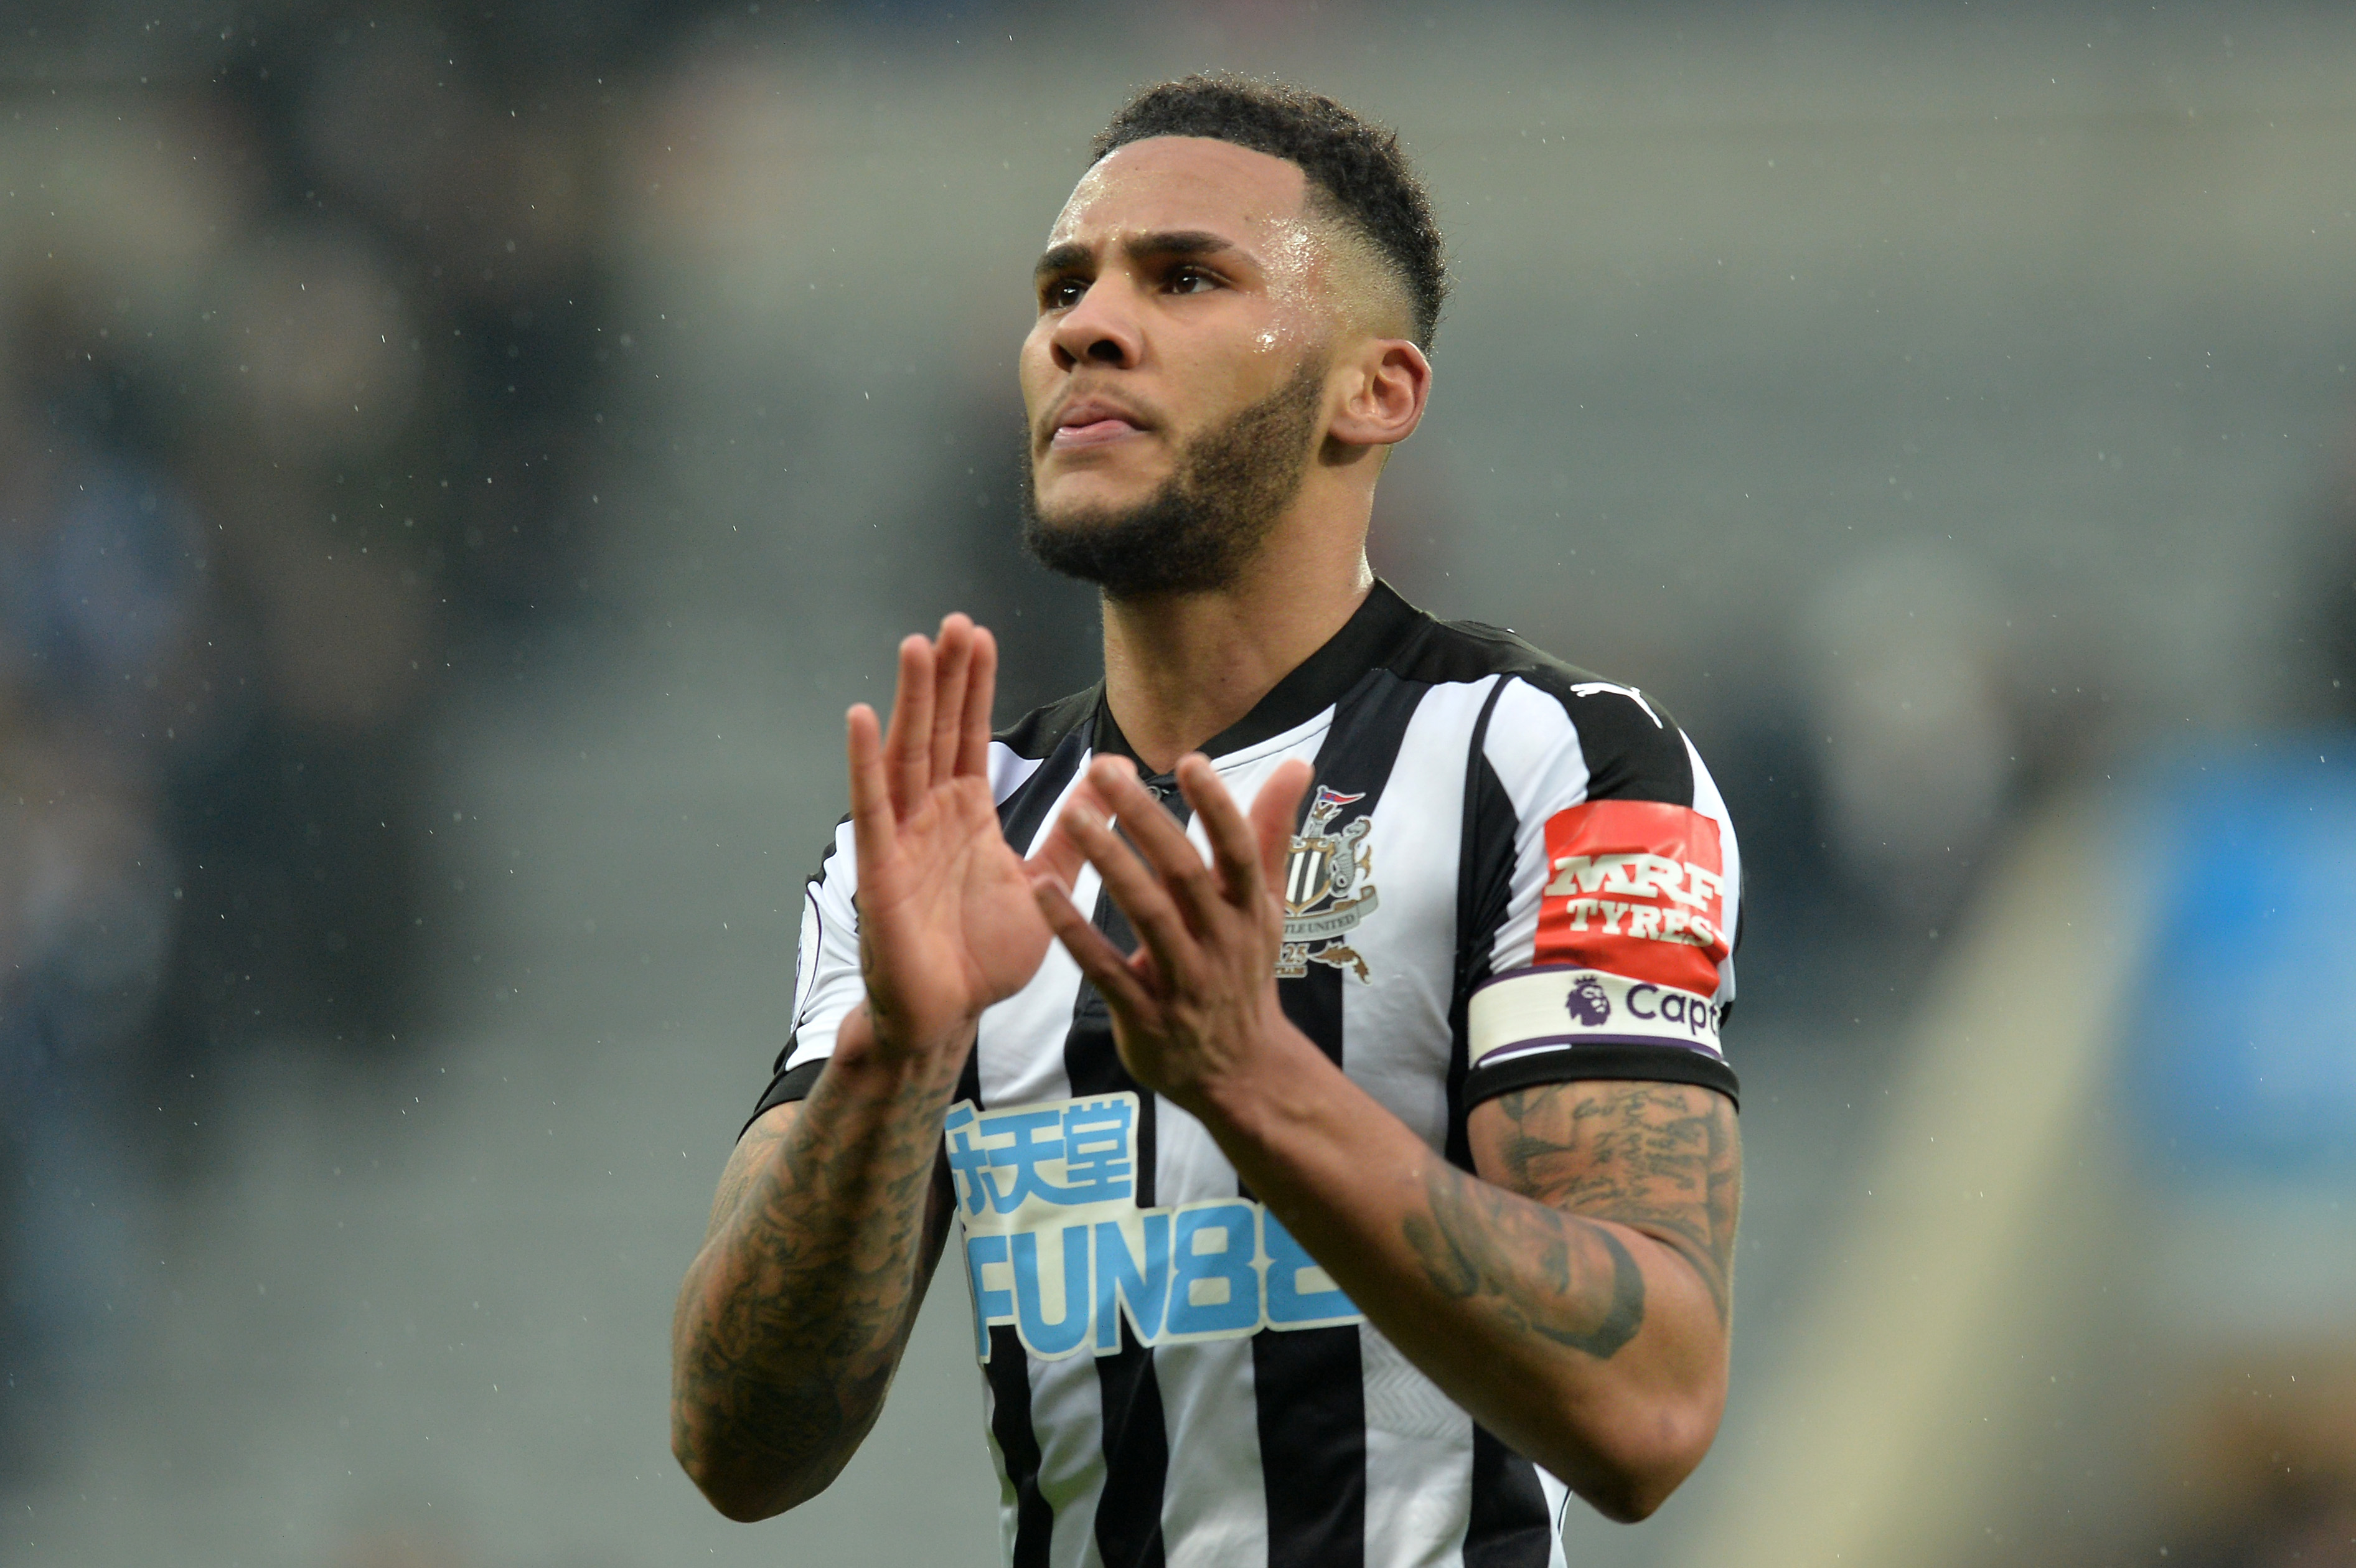 NEWCASTLE UPON TYNE, ENGLAND - MARCH 10:  Jamaal Lascelles of Newcastle United applauds fans after the Premier League match between Newcastle United and Southampton at St. James Park on March 10, 2018 in Newcastle upon Tyne, England.  (Photo by Mark Runnacles/Getty Images)